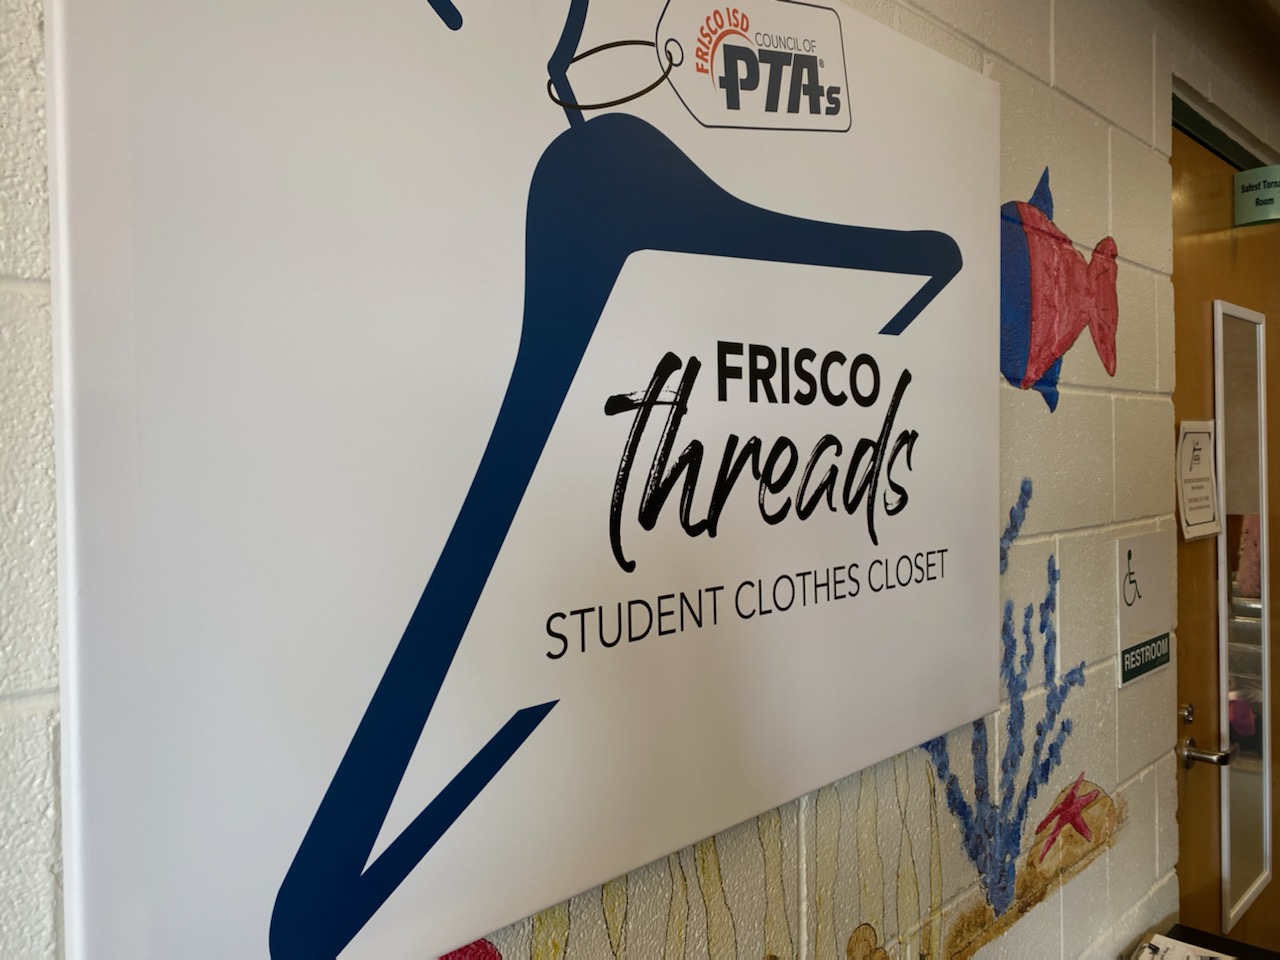 Providing+clothes%2C+Frisco+Threads+helps+district+students